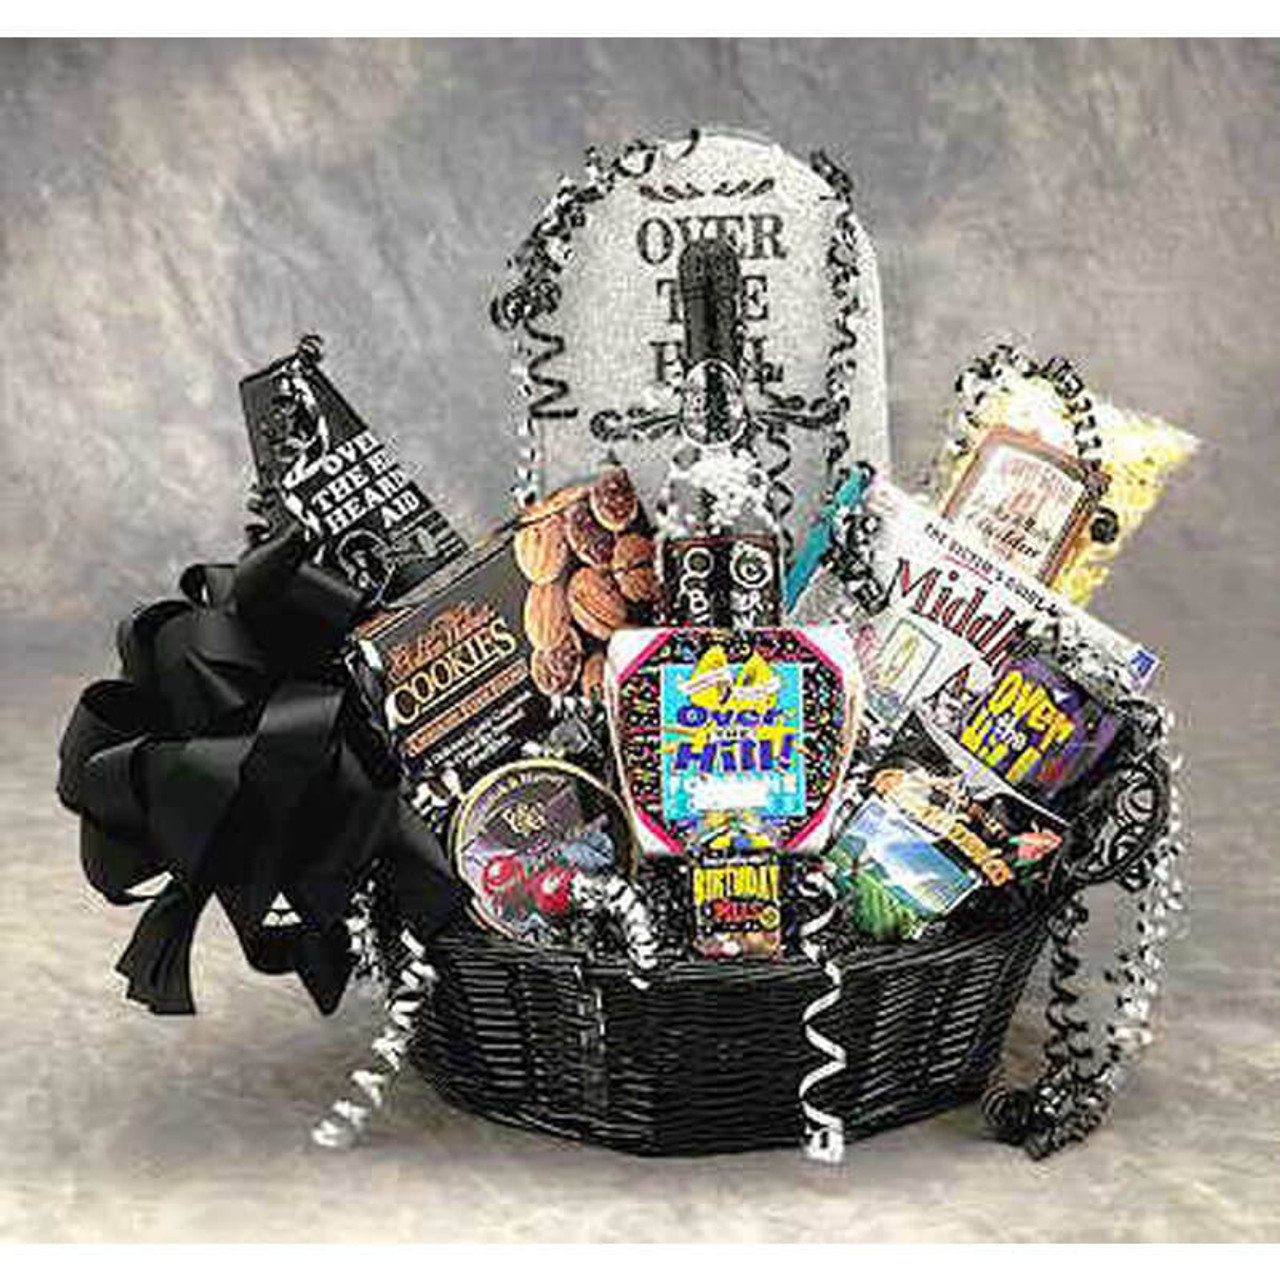 https://cdn11.bigcommerce.com/s-cz44ad1pu6/images/stencil/1280x1280/products/1061/4342/Over-the-Hill-Birthday-Gift-Basket__56237.1536956407.jpg?c=2